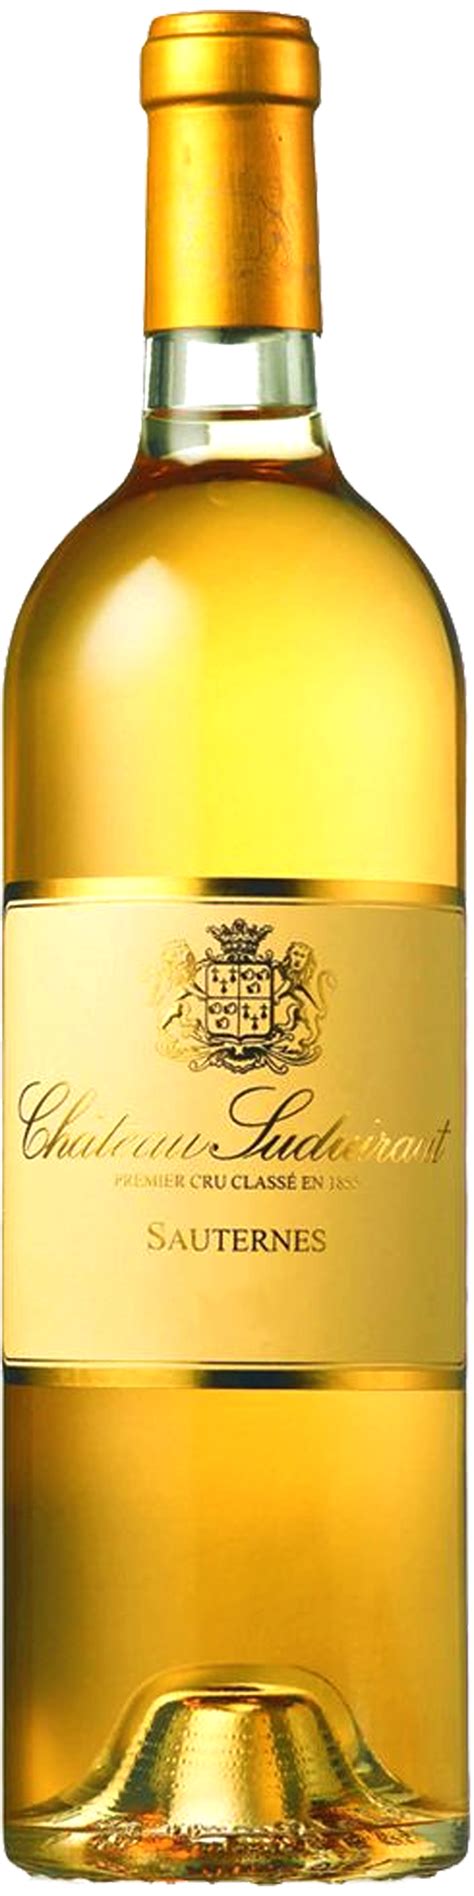 Both sauternes and barsac excellent, with fresh, racy styled wines. 2009 Château Suduiraut, 1er Cru Sauternes - Armit Wines